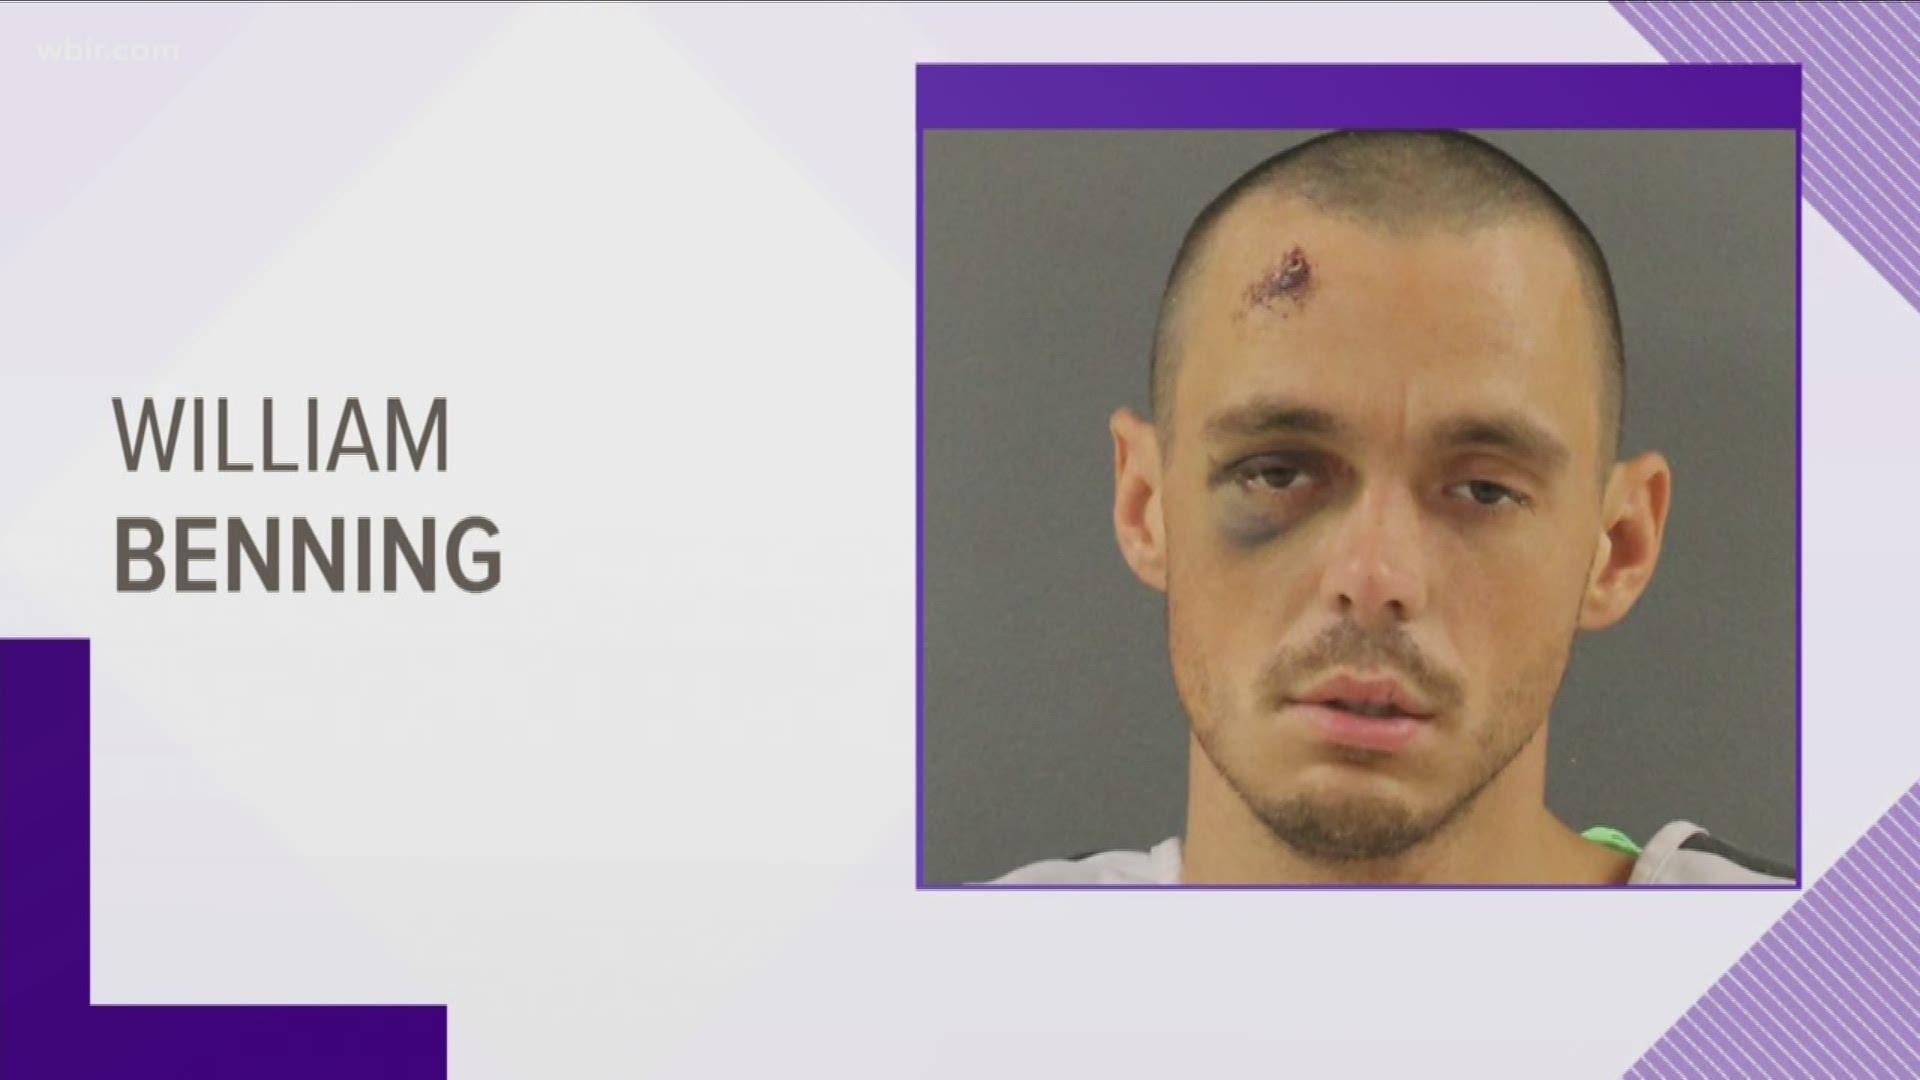 Investigators say William Benning, 29, is charged with first-degree murder after threatening his roommate with a sword.